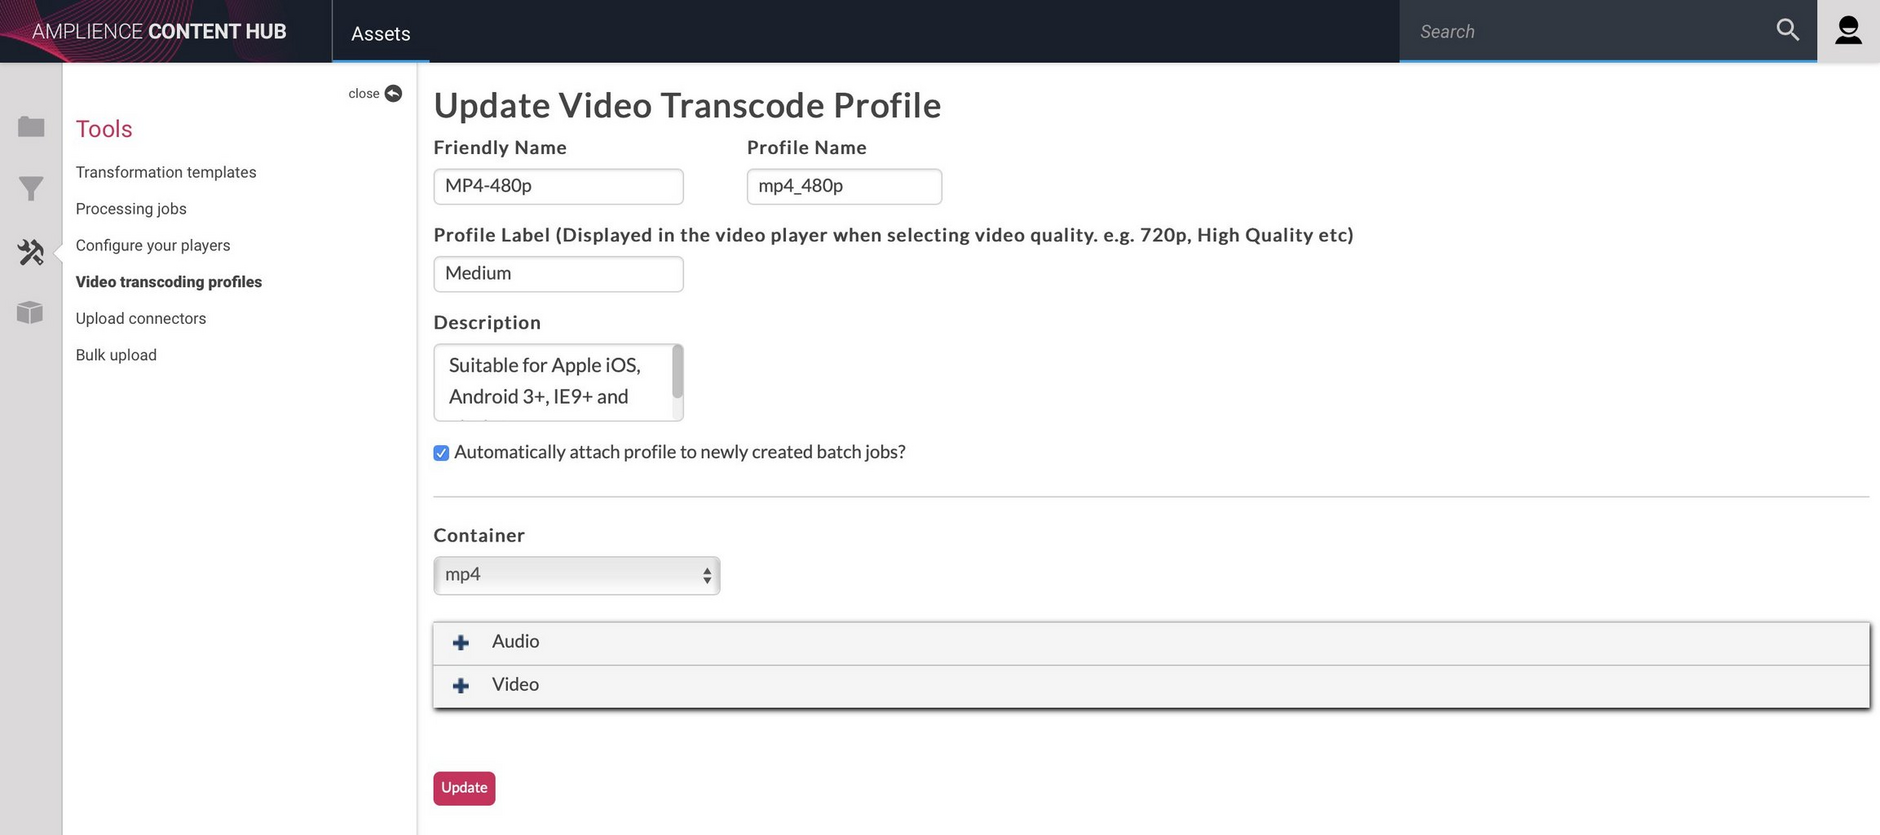 Updating a video transcoding profile